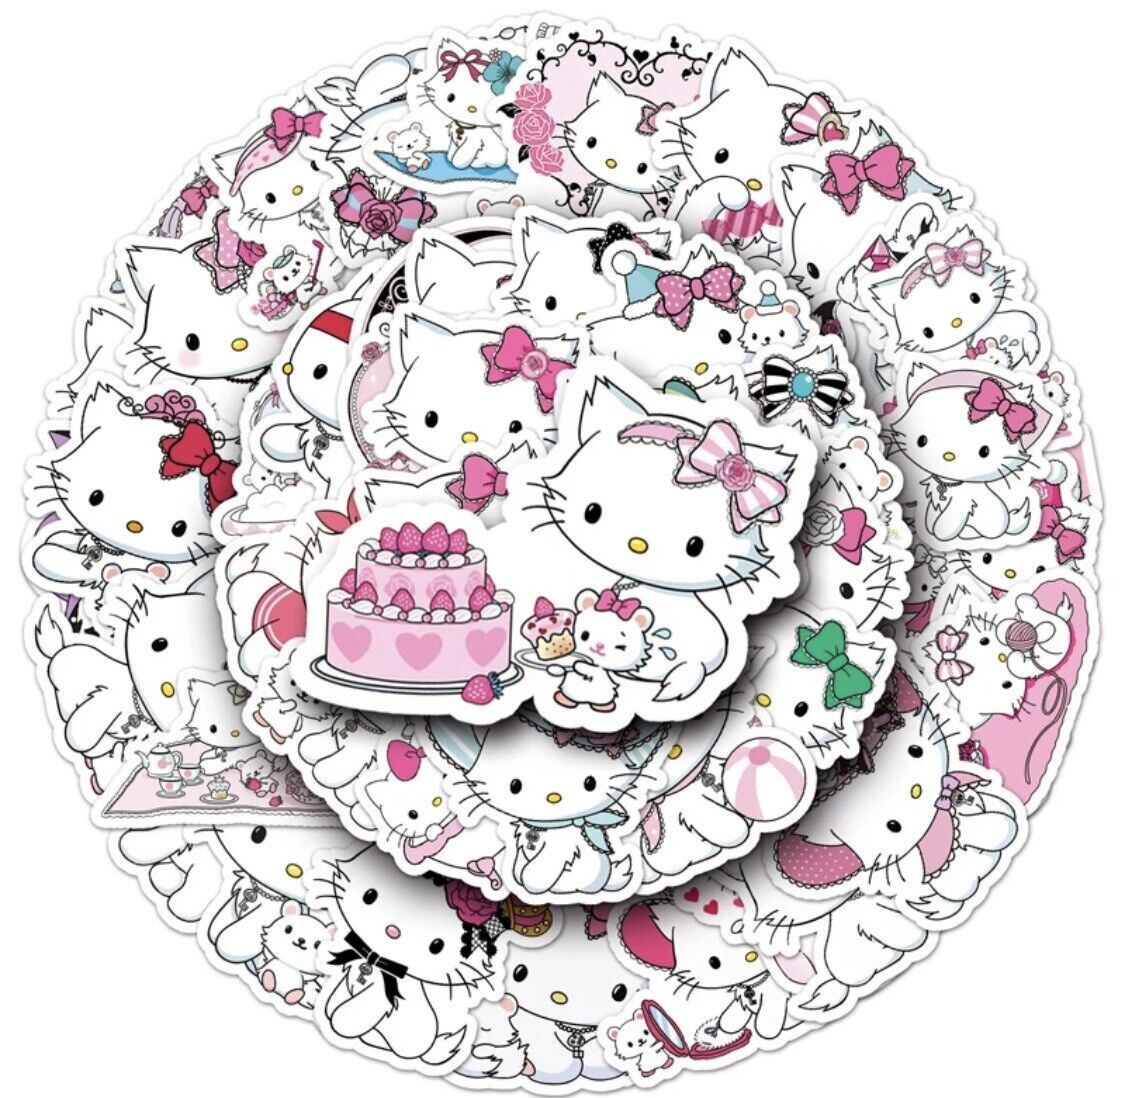 Sanrio Charmmy Kitty Stickers 50 Pcs Hello Kitty Waterproof Decals US SELLER